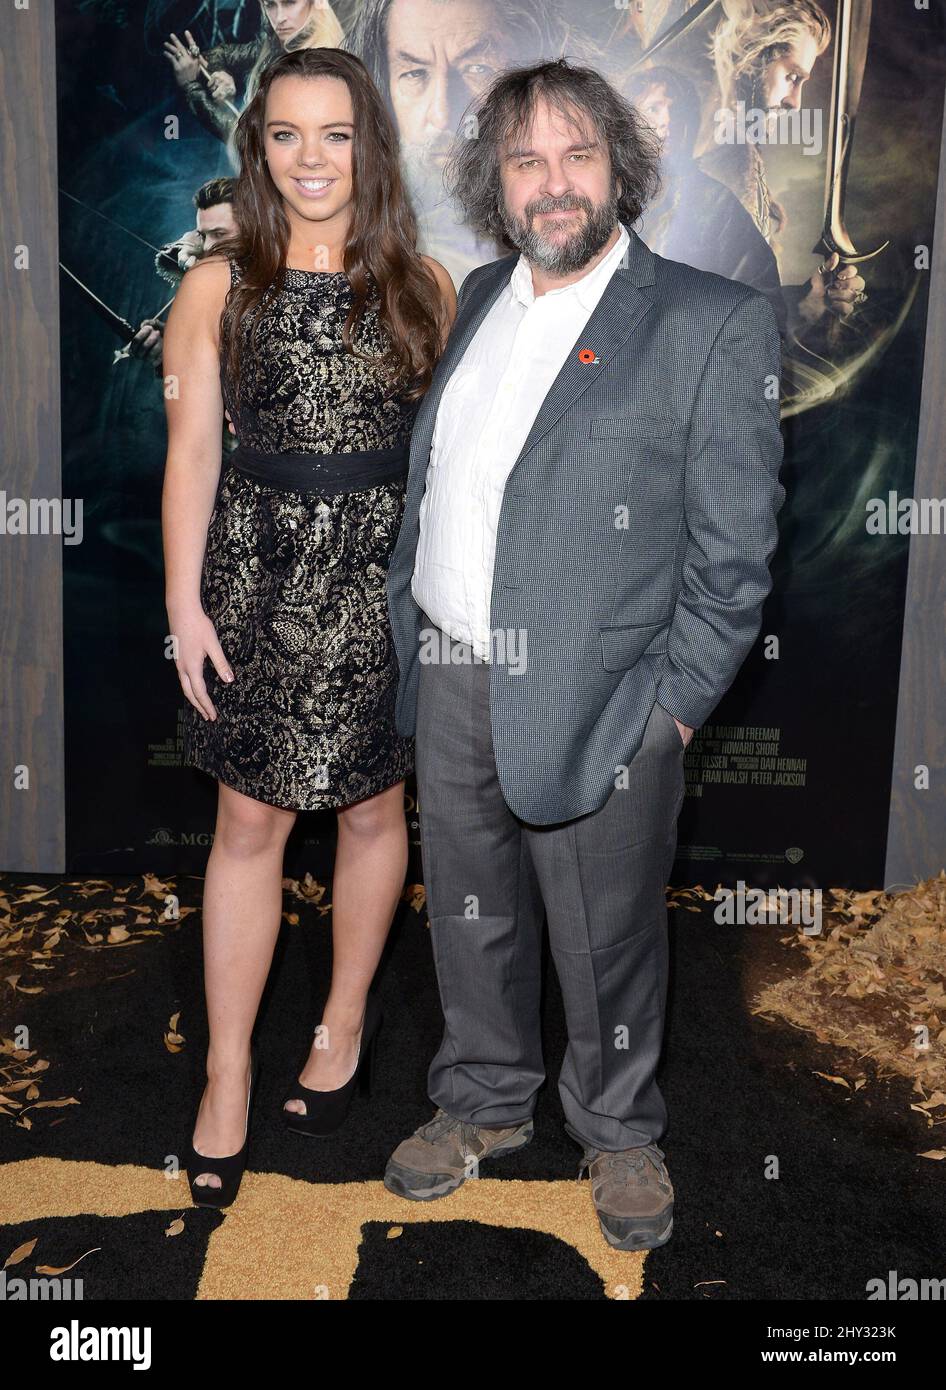 Peter Jackson attending 'The Hobbit: The Desolation Of Smaug' premiere Held at Dolby Theatre in Los Angeles, USA. Stock Photo